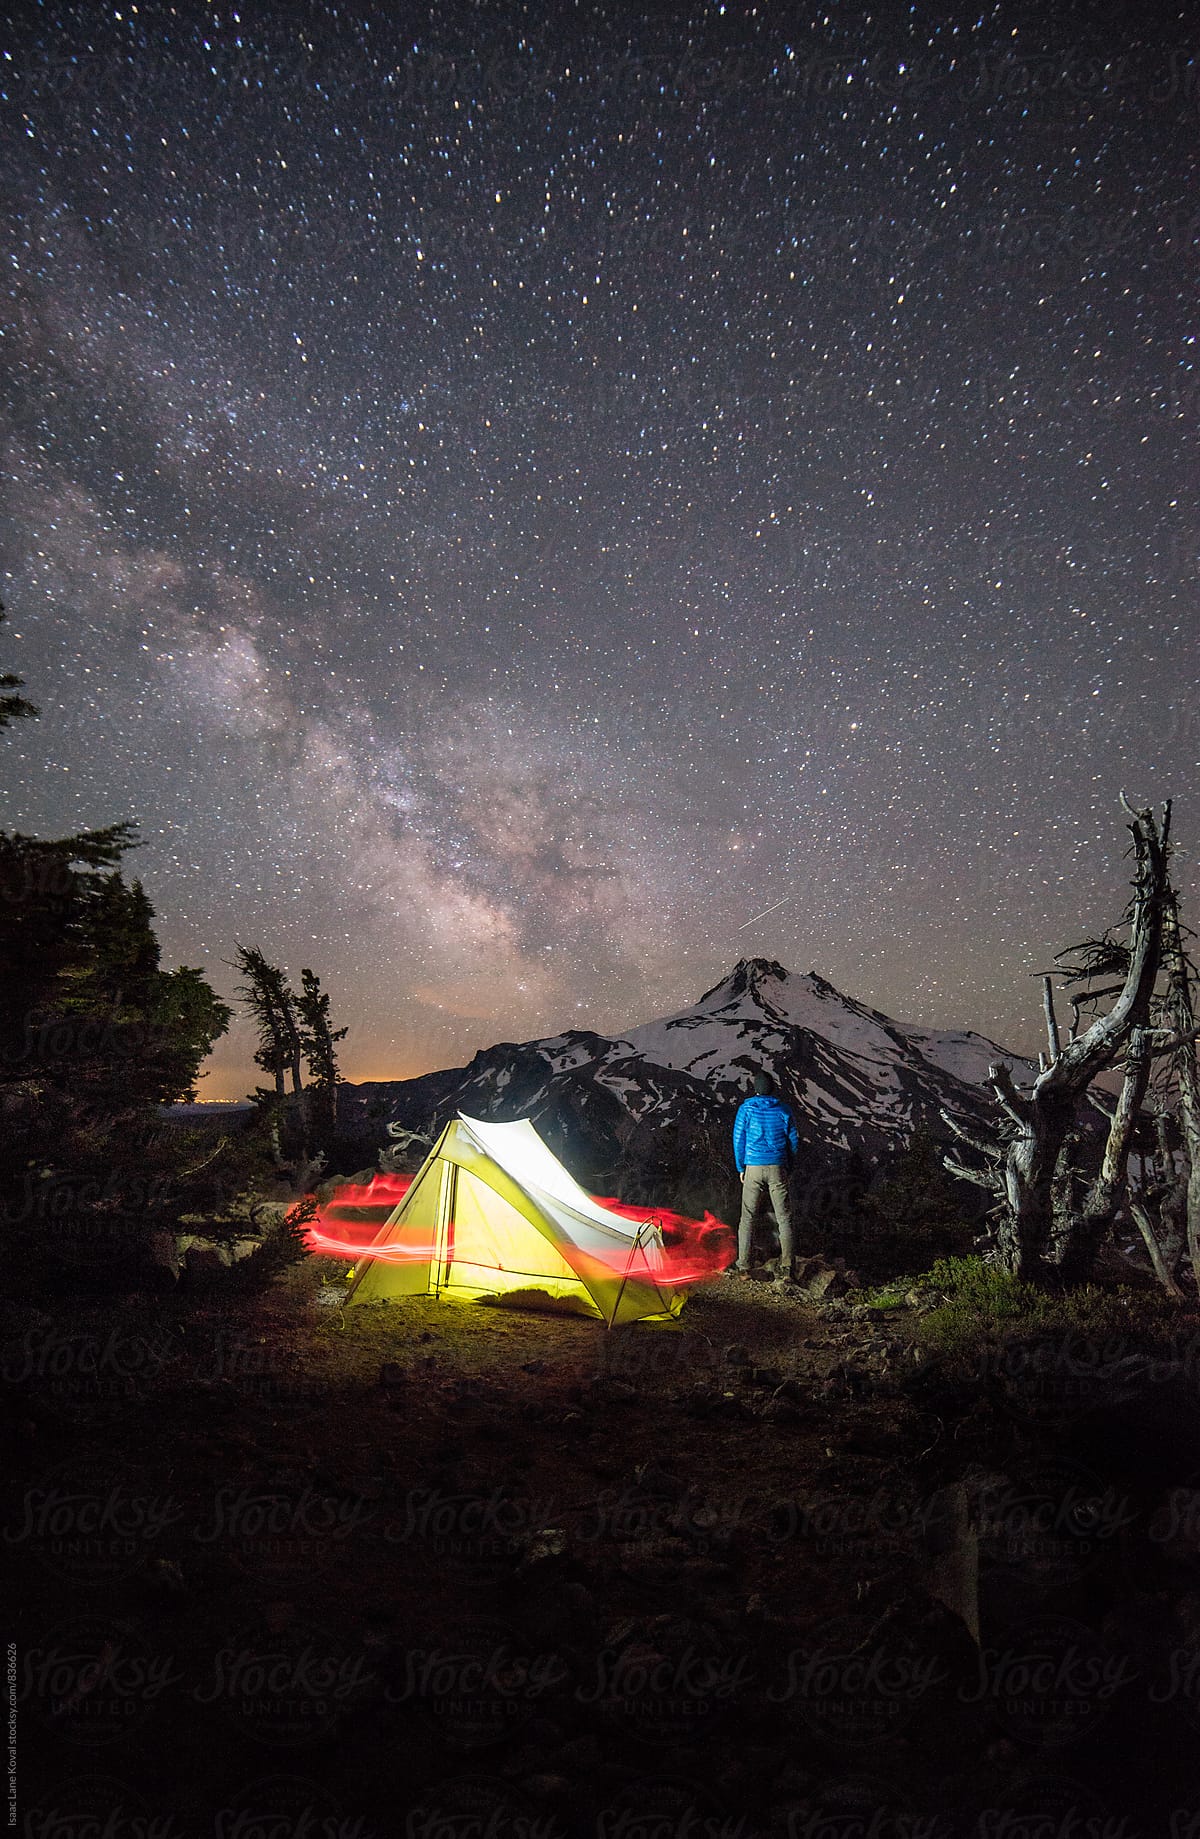 Man standing watch in front of Mt Jefferson with starry night sky